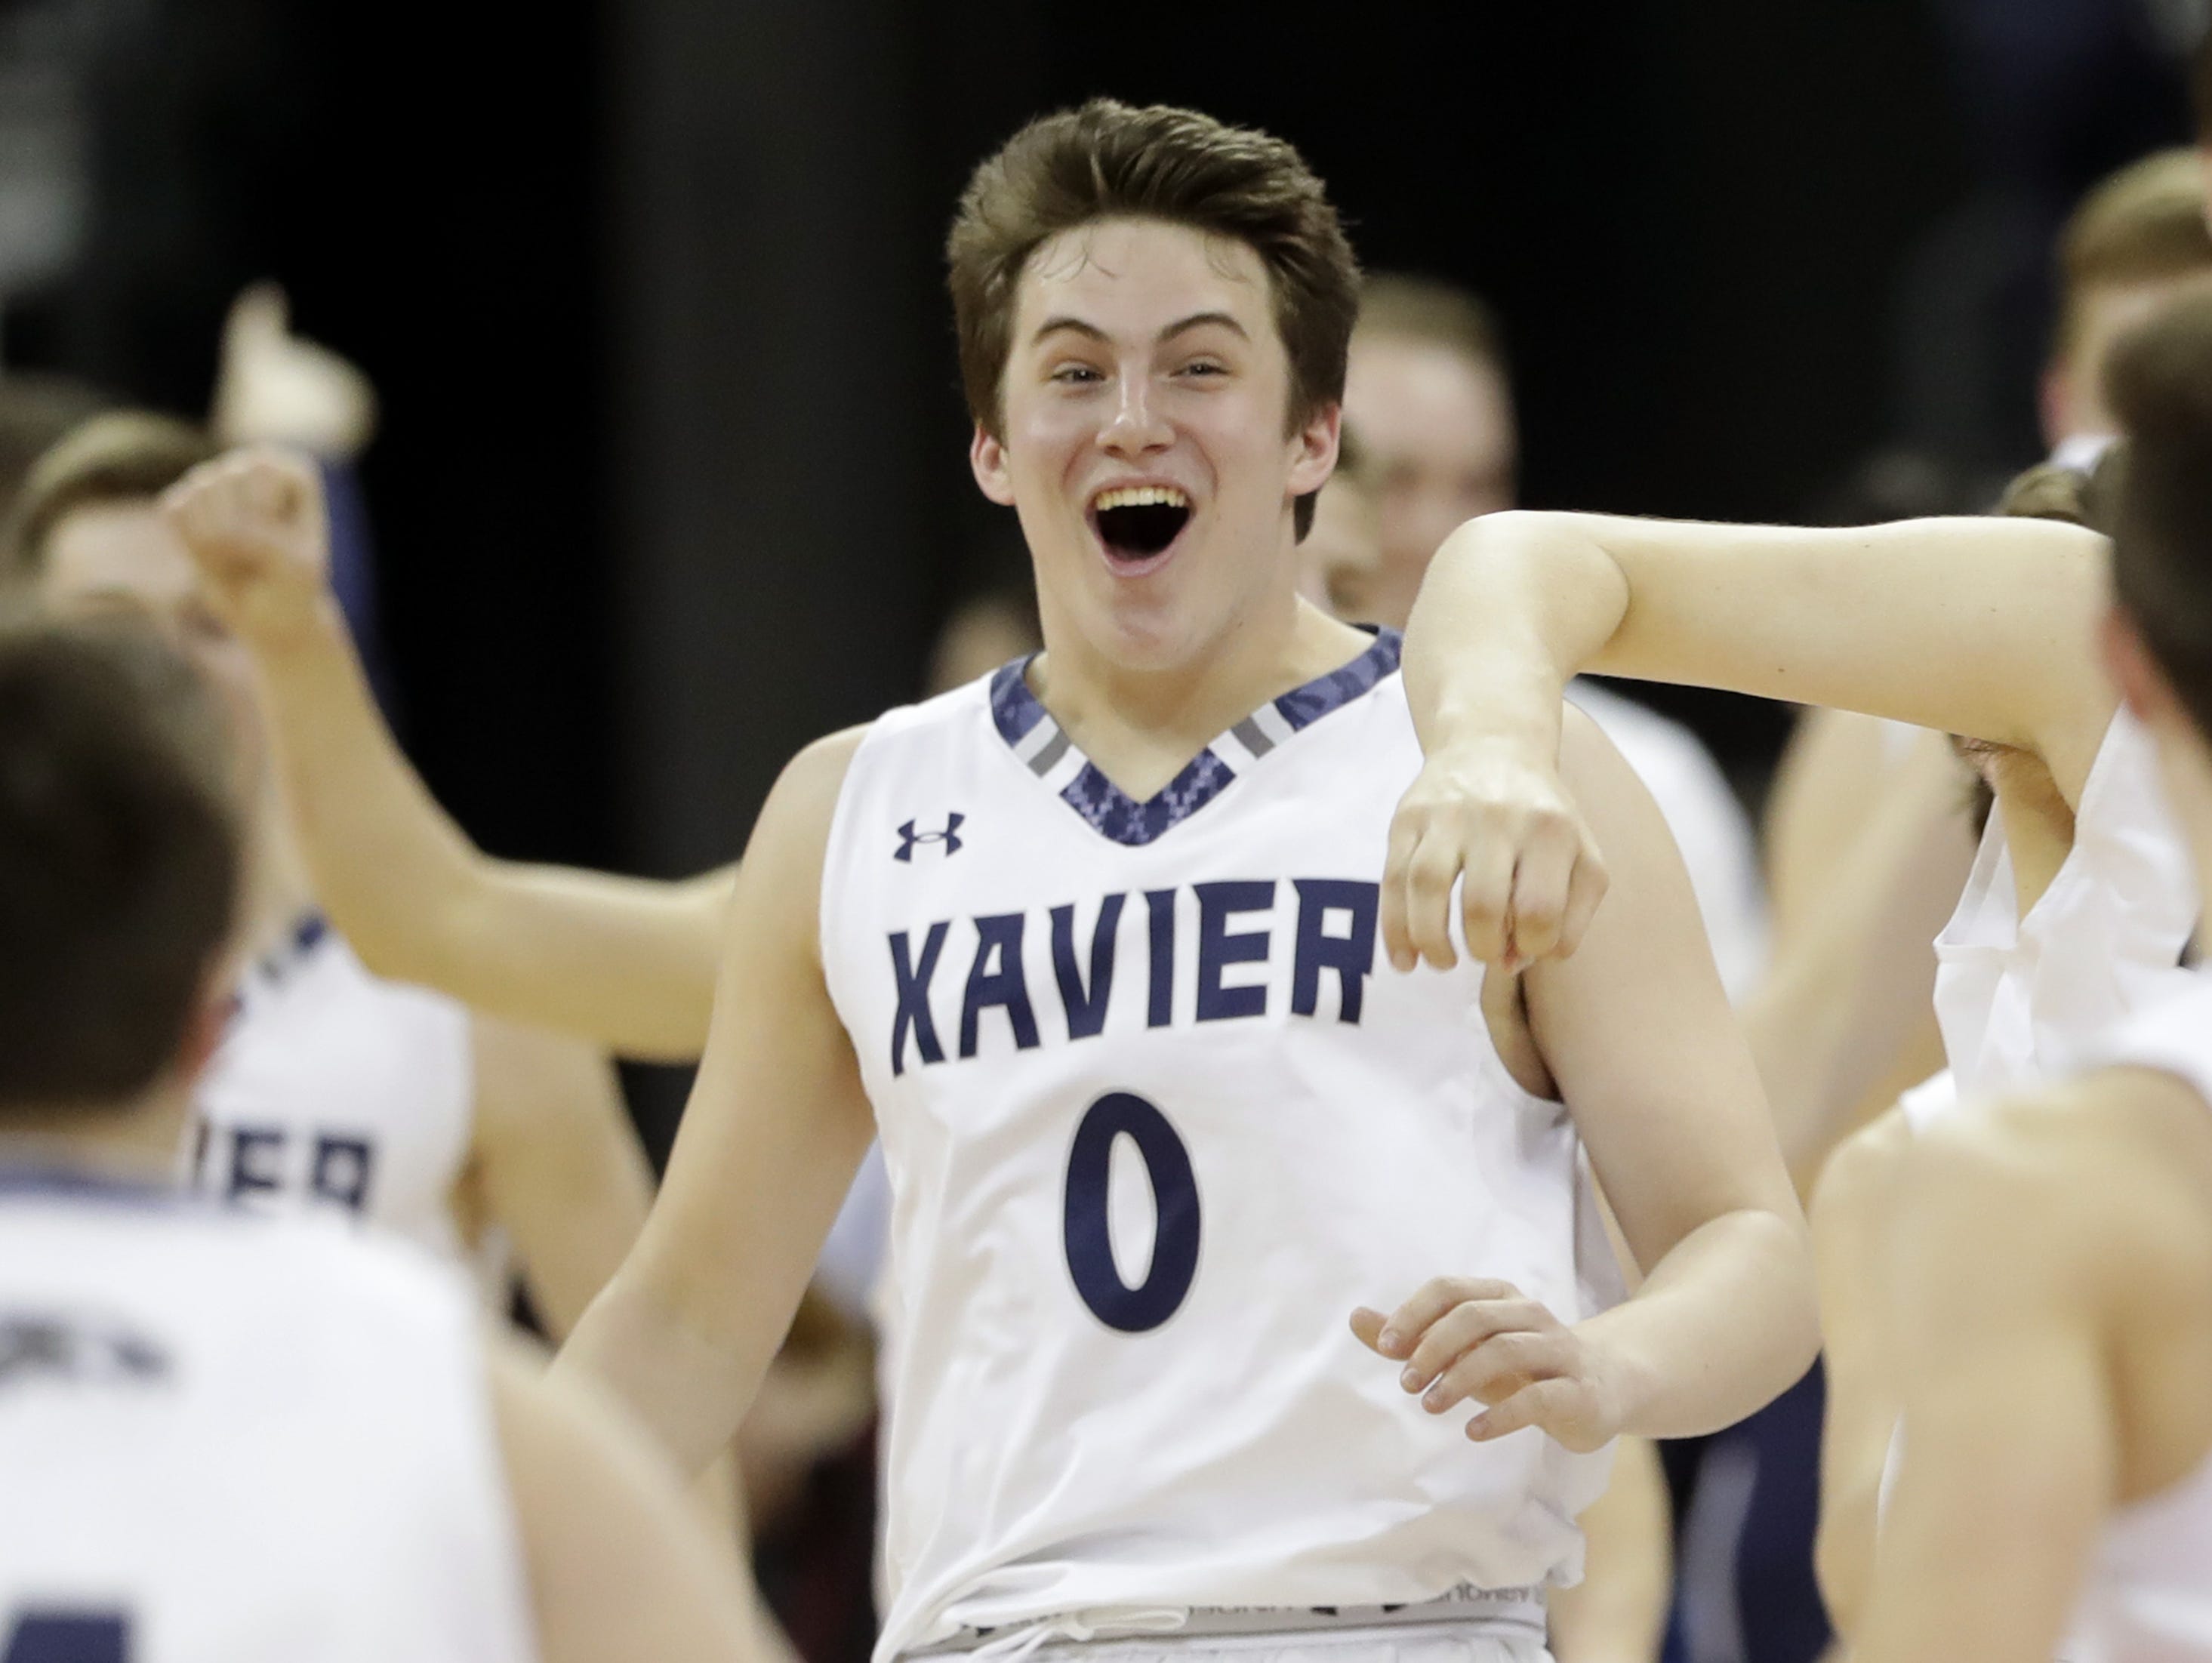 Xavier High School's Henry Egan celebrates following the Hawks' 73 to 47 victory over Prescott High School during their division 3 WIAA state basketball championship game on Saturday, March 18, 2017 at the Kohl Center in Madison, Wis. Wm. Glasheen/USA TODAY NETWORK-Wisconsin